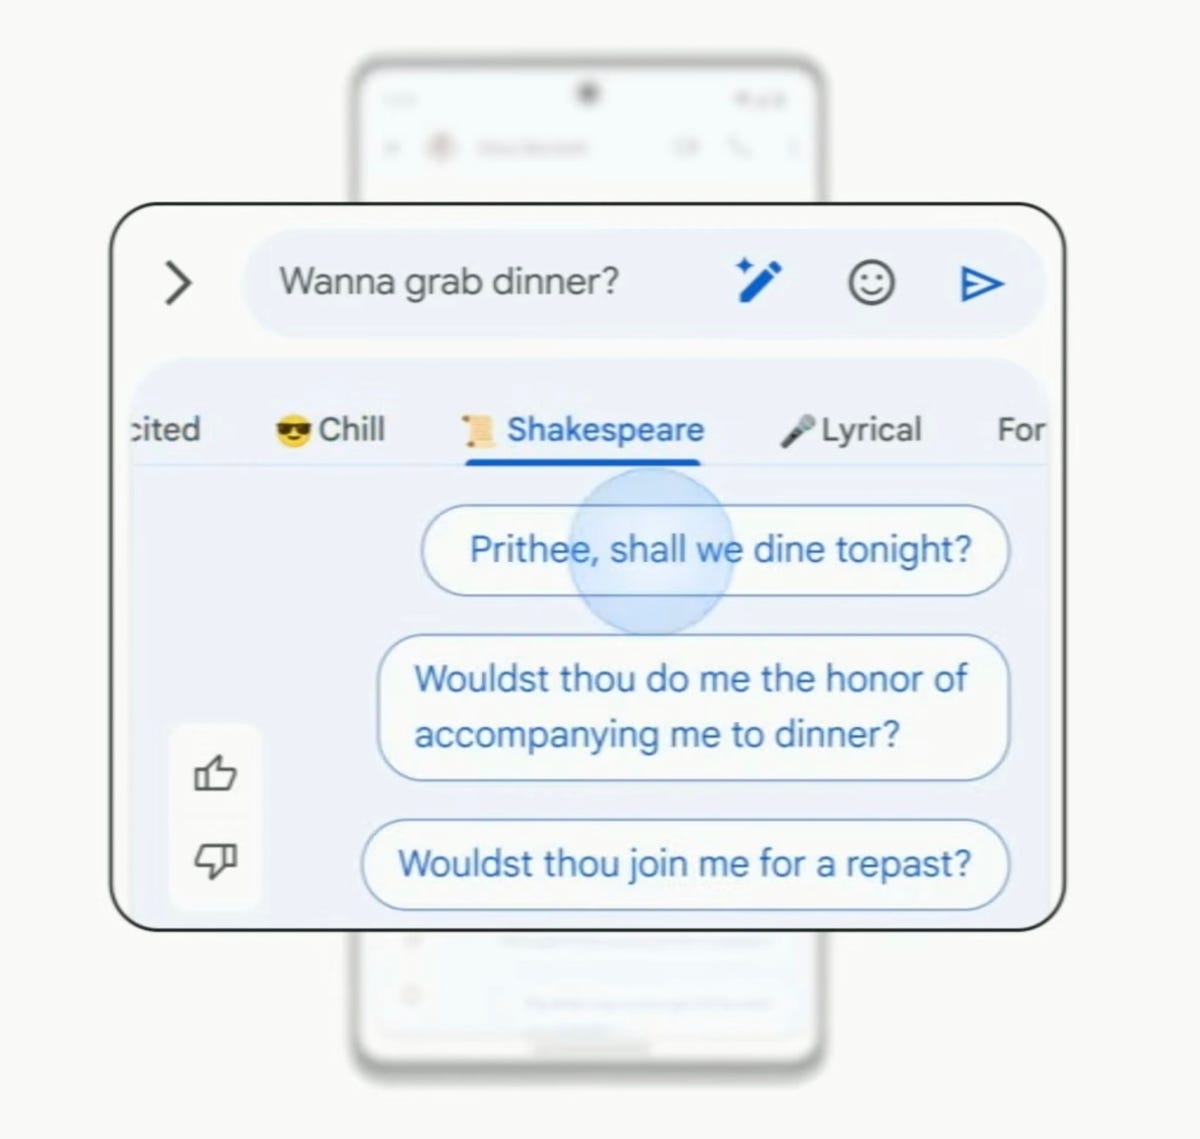 Google Magic Compose, asking someone to get dinner in a Shakespearean tone